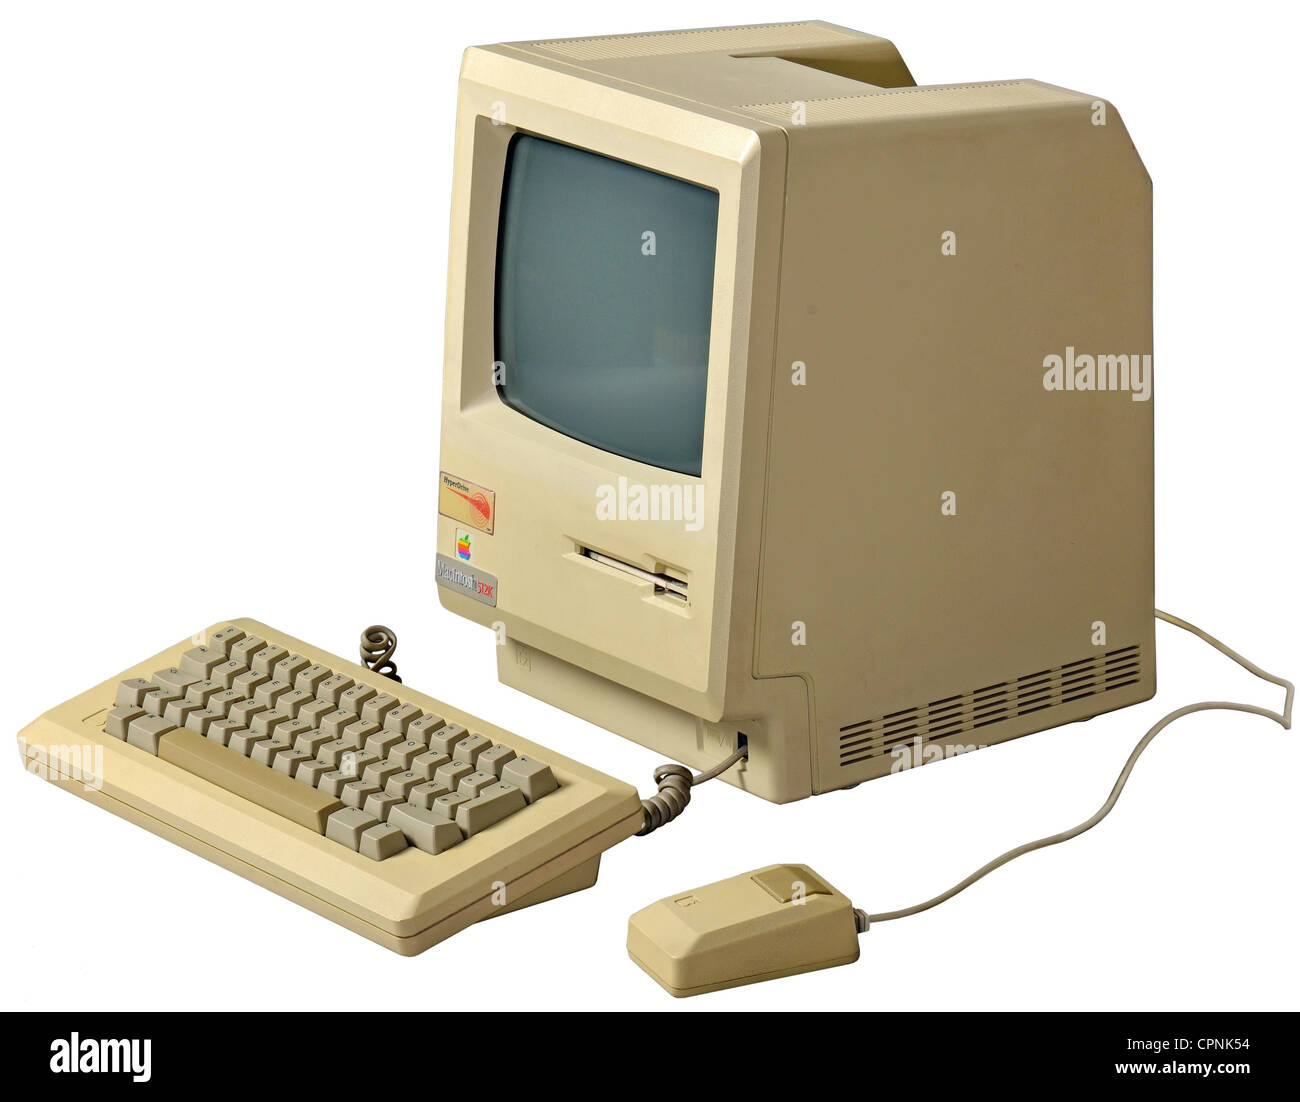 computing / electronics,computer,Apple Macintosh 512k,with integrated 9-Zoll-s/w-Monitor and 3.5-inch Flopyy Disc Drive,keyboard,mouse,computer mouse,Apple Mouse,512 KB RAM,processor: Motorola 68000,8 MHz,extra built-in hard disk drive HyperDrive,the at that time first internal hard disk drive for the first Apple Macintosh,original price 1984: 3.195 dollar,made by: Apple Computer Inc.,Cupertino,California,USA,1984,design classics,nickname,nicknames,nicknaming,Apple Mac,Mac cube,Made in USA,personal computer,history of computer,comput,Additional-Rights-Clearences-Not Available Stock Photo